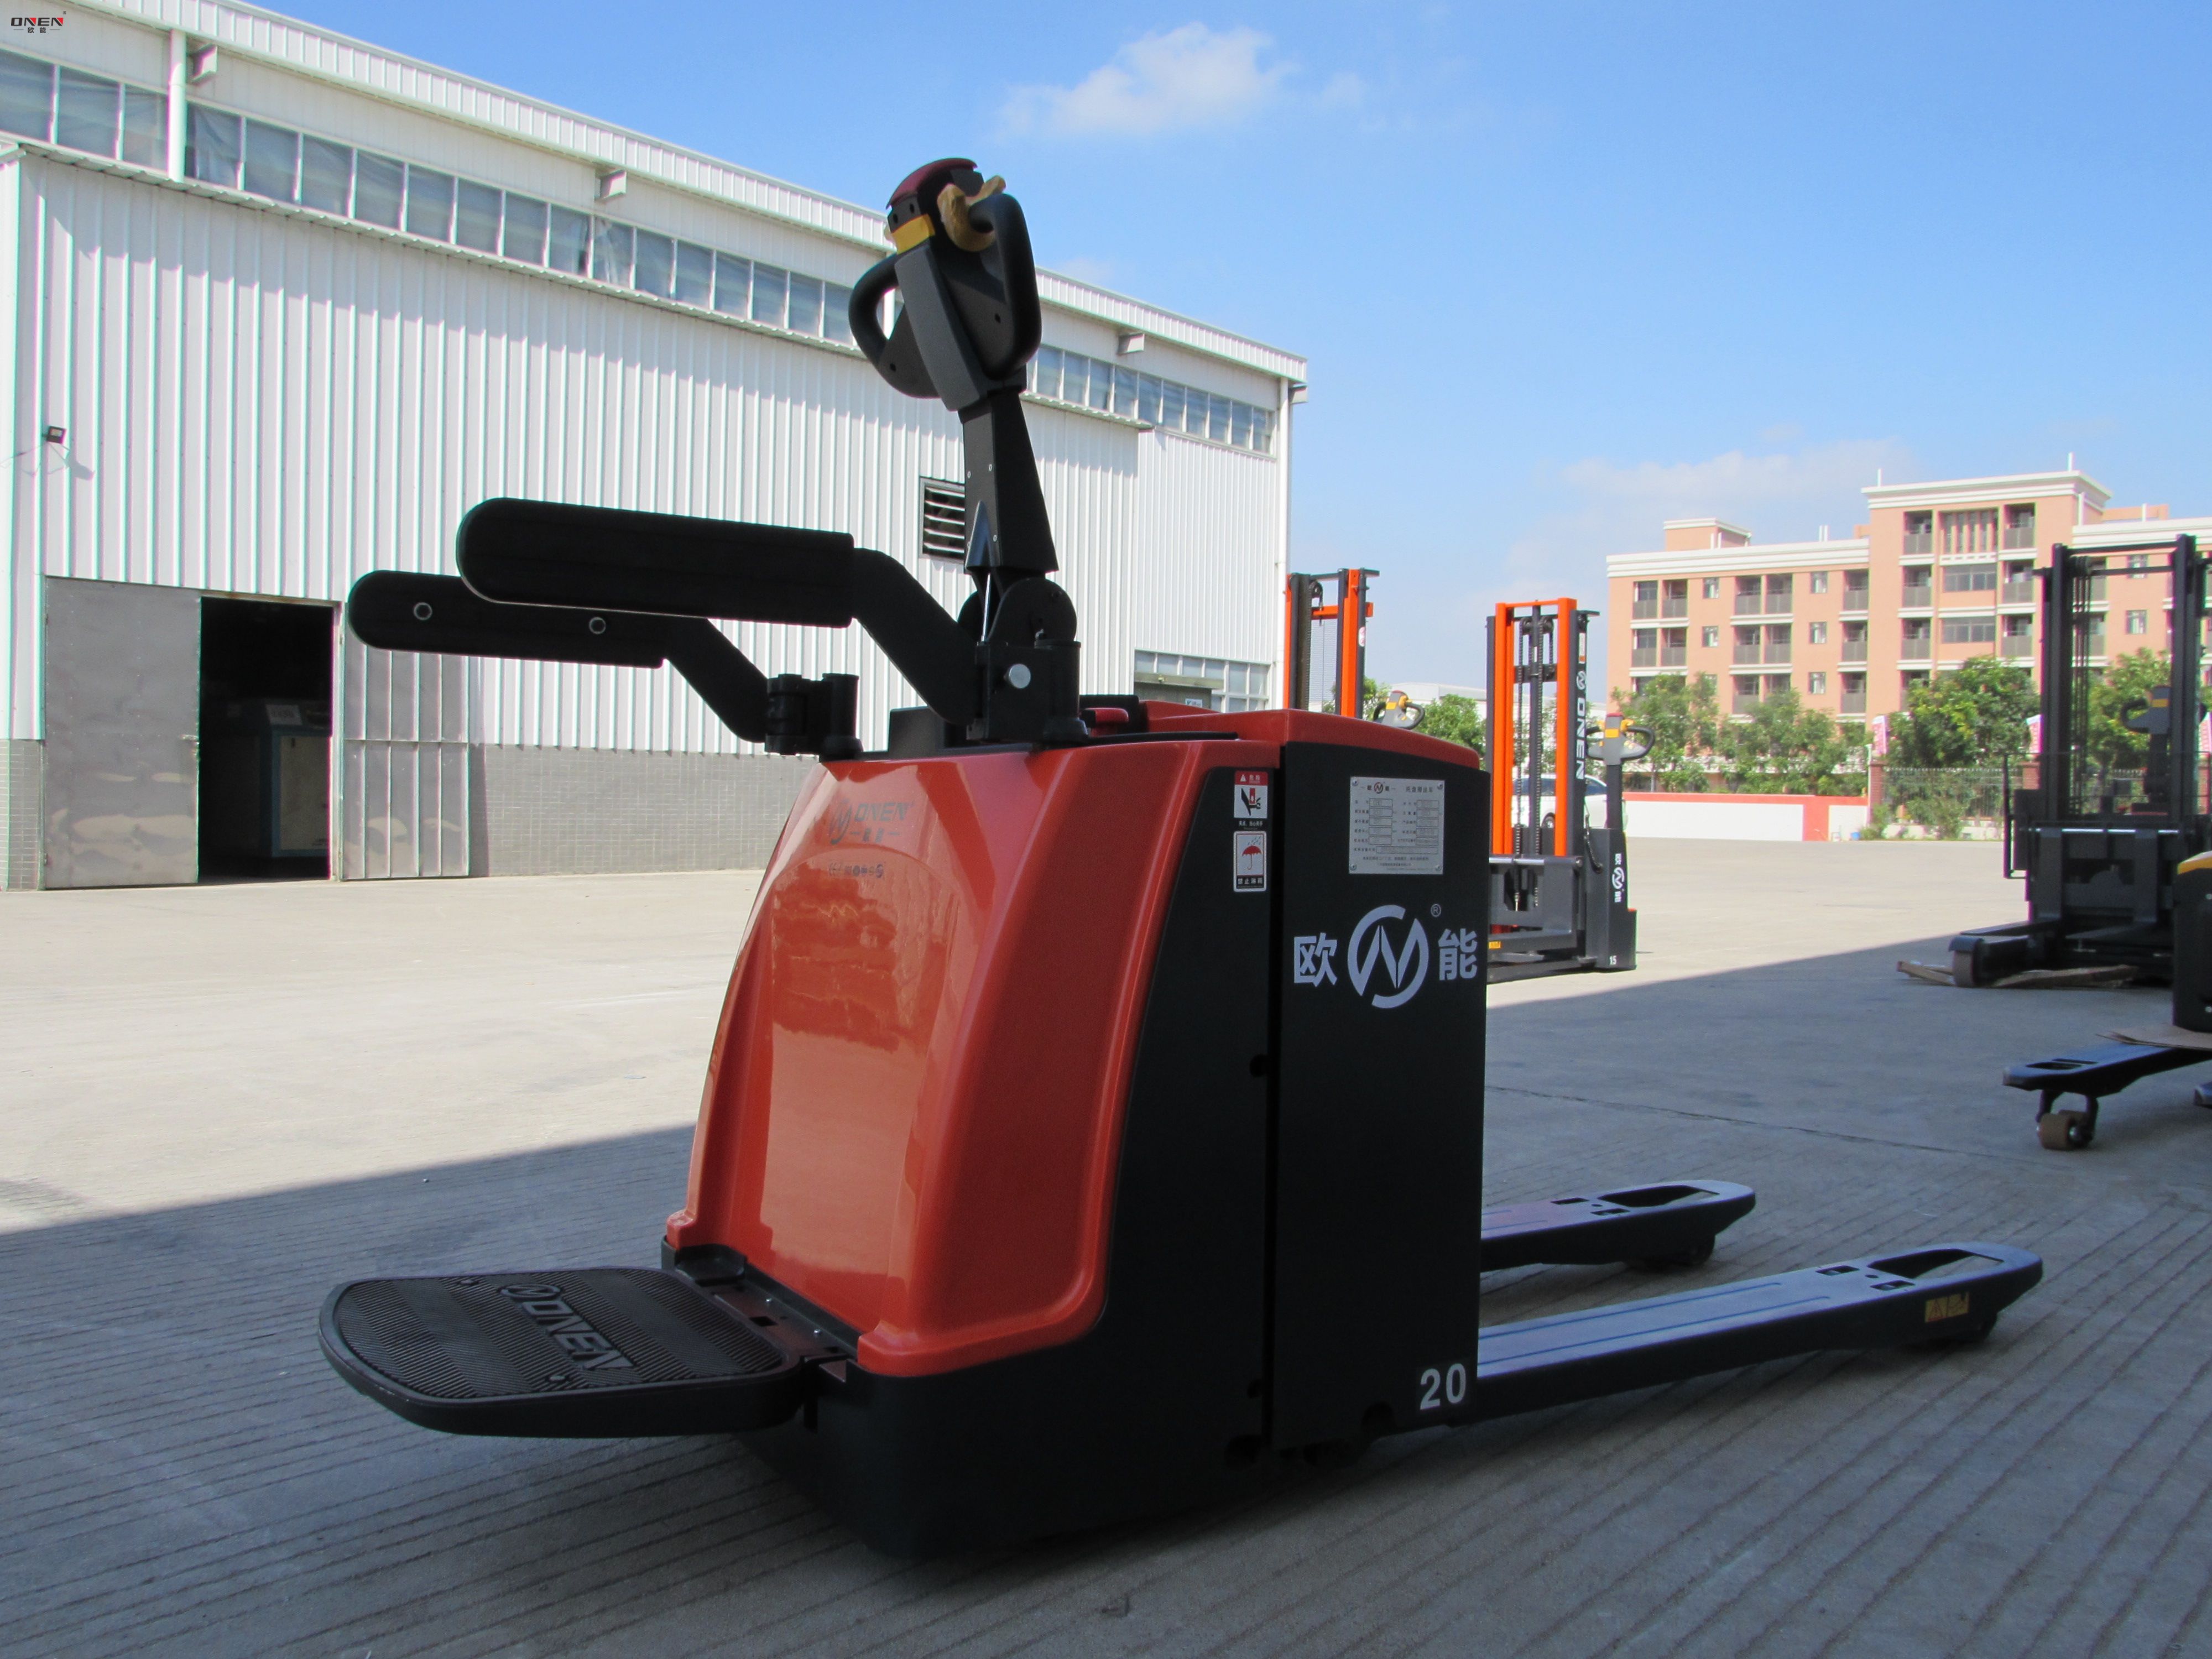 stand on electric reach truck